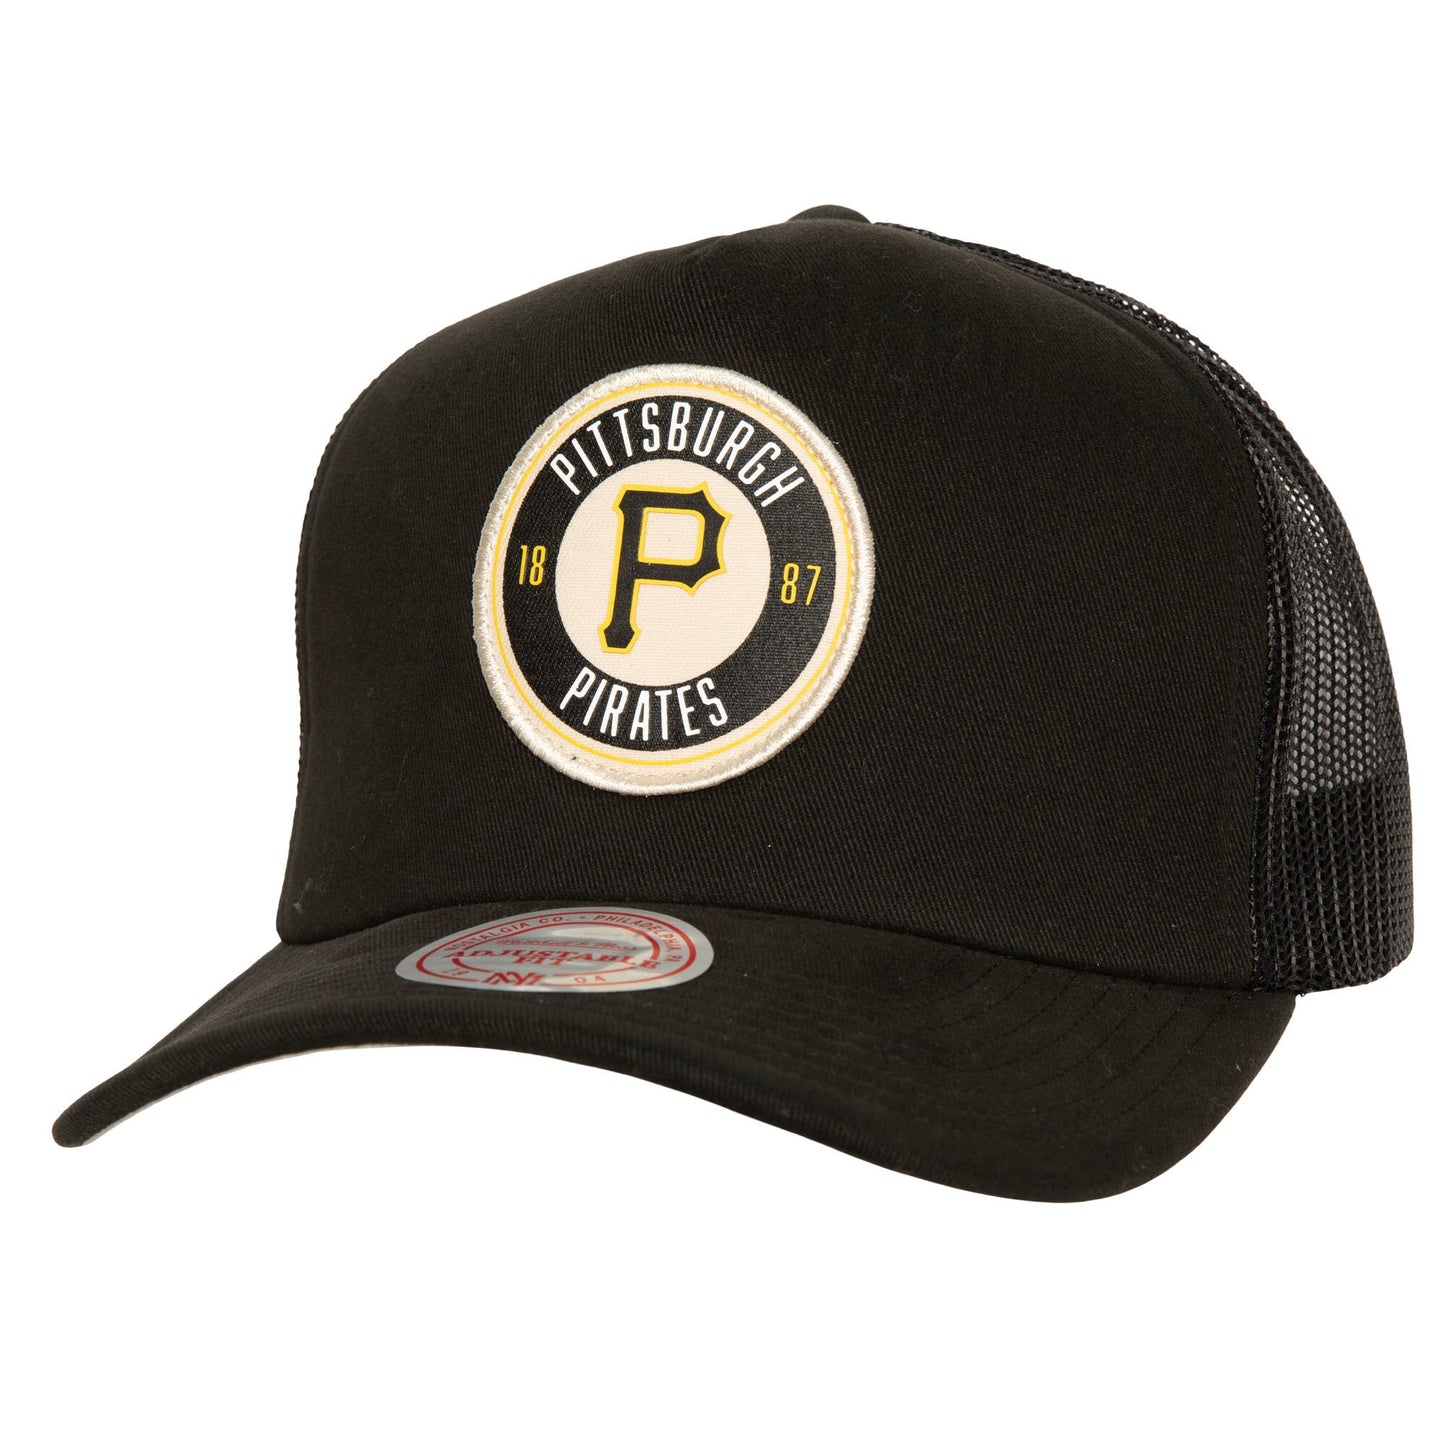 Pittsburgh Pirates Mitchell & Ness Cooperstown Collection Circle Change Trucker Adjustable Hat - Black